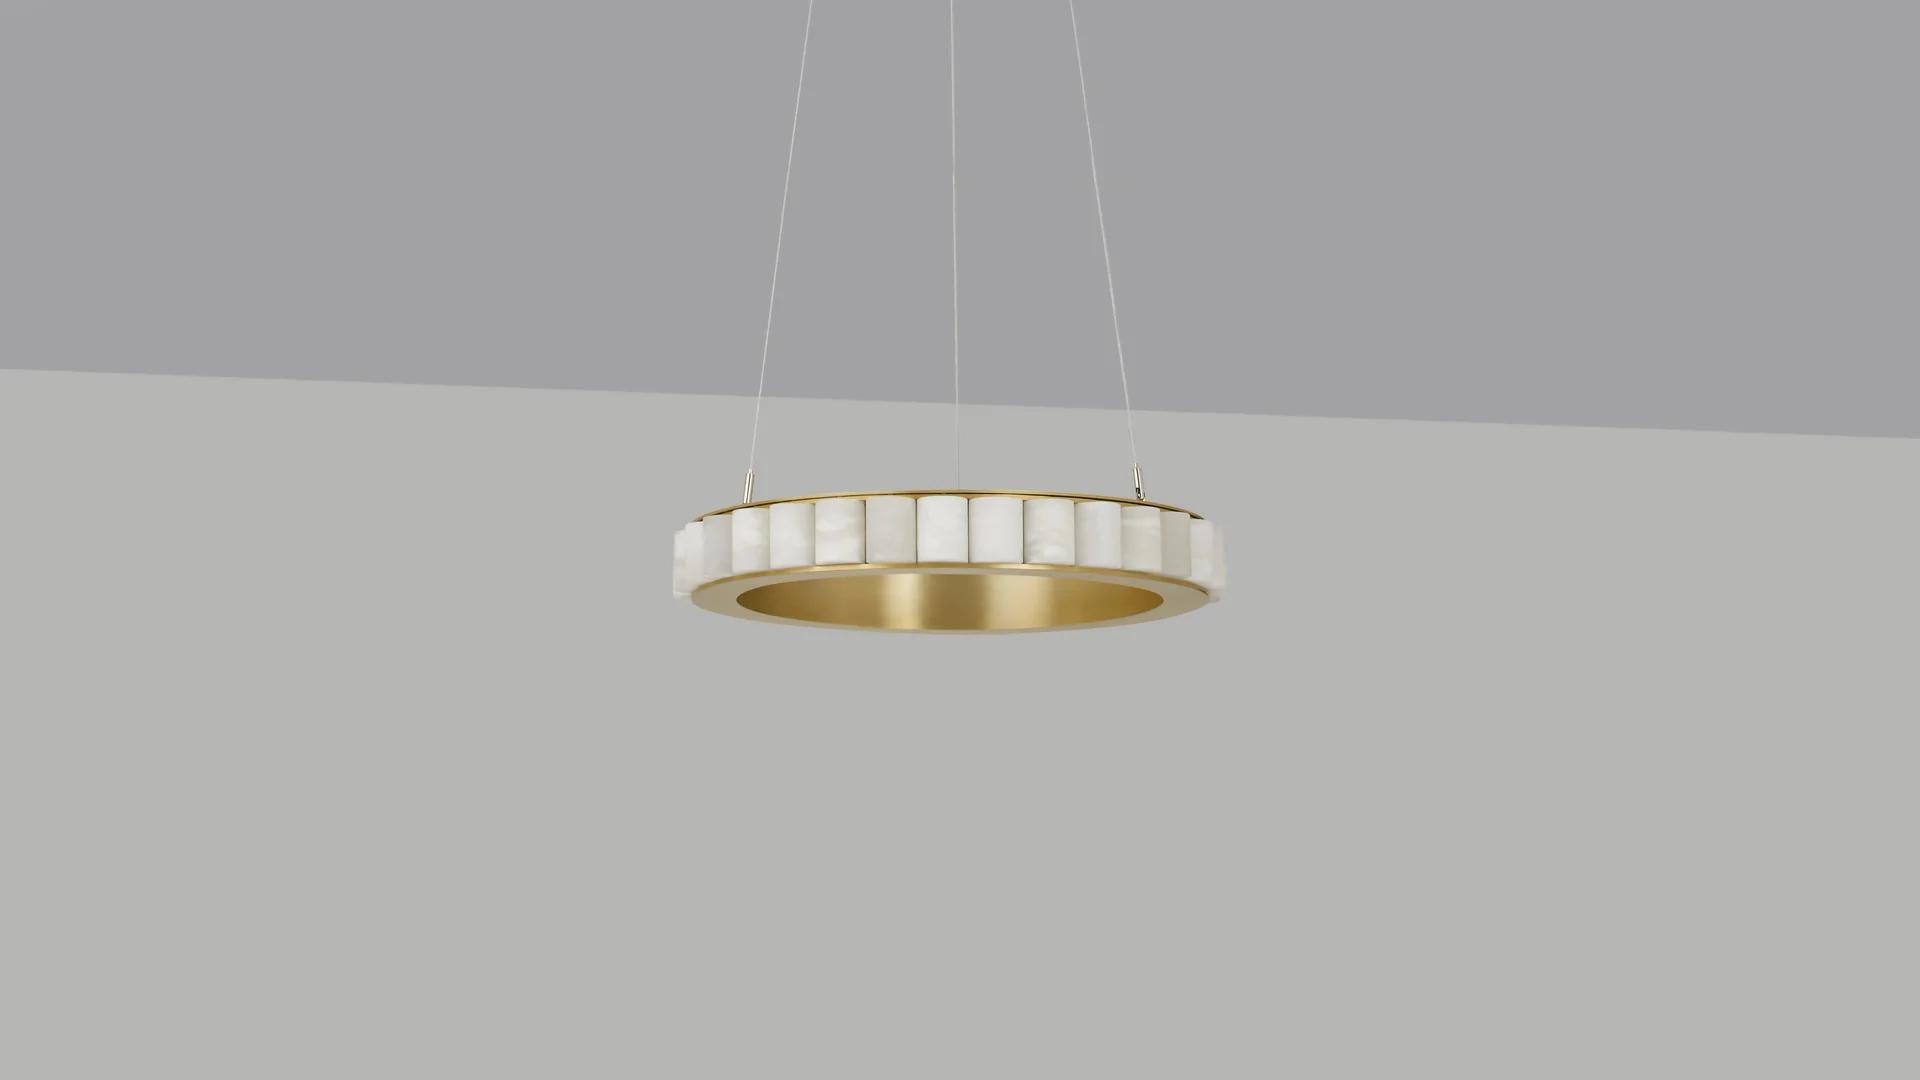 Avalon medium chandelier by CTO Lighting
Materials: satin brass with alabaster stone.
Also available in different finishes and materials.
Dimensions: D 64 x H 31.5 cm

All our lamps can be wired according to each country. If sold to the USA it